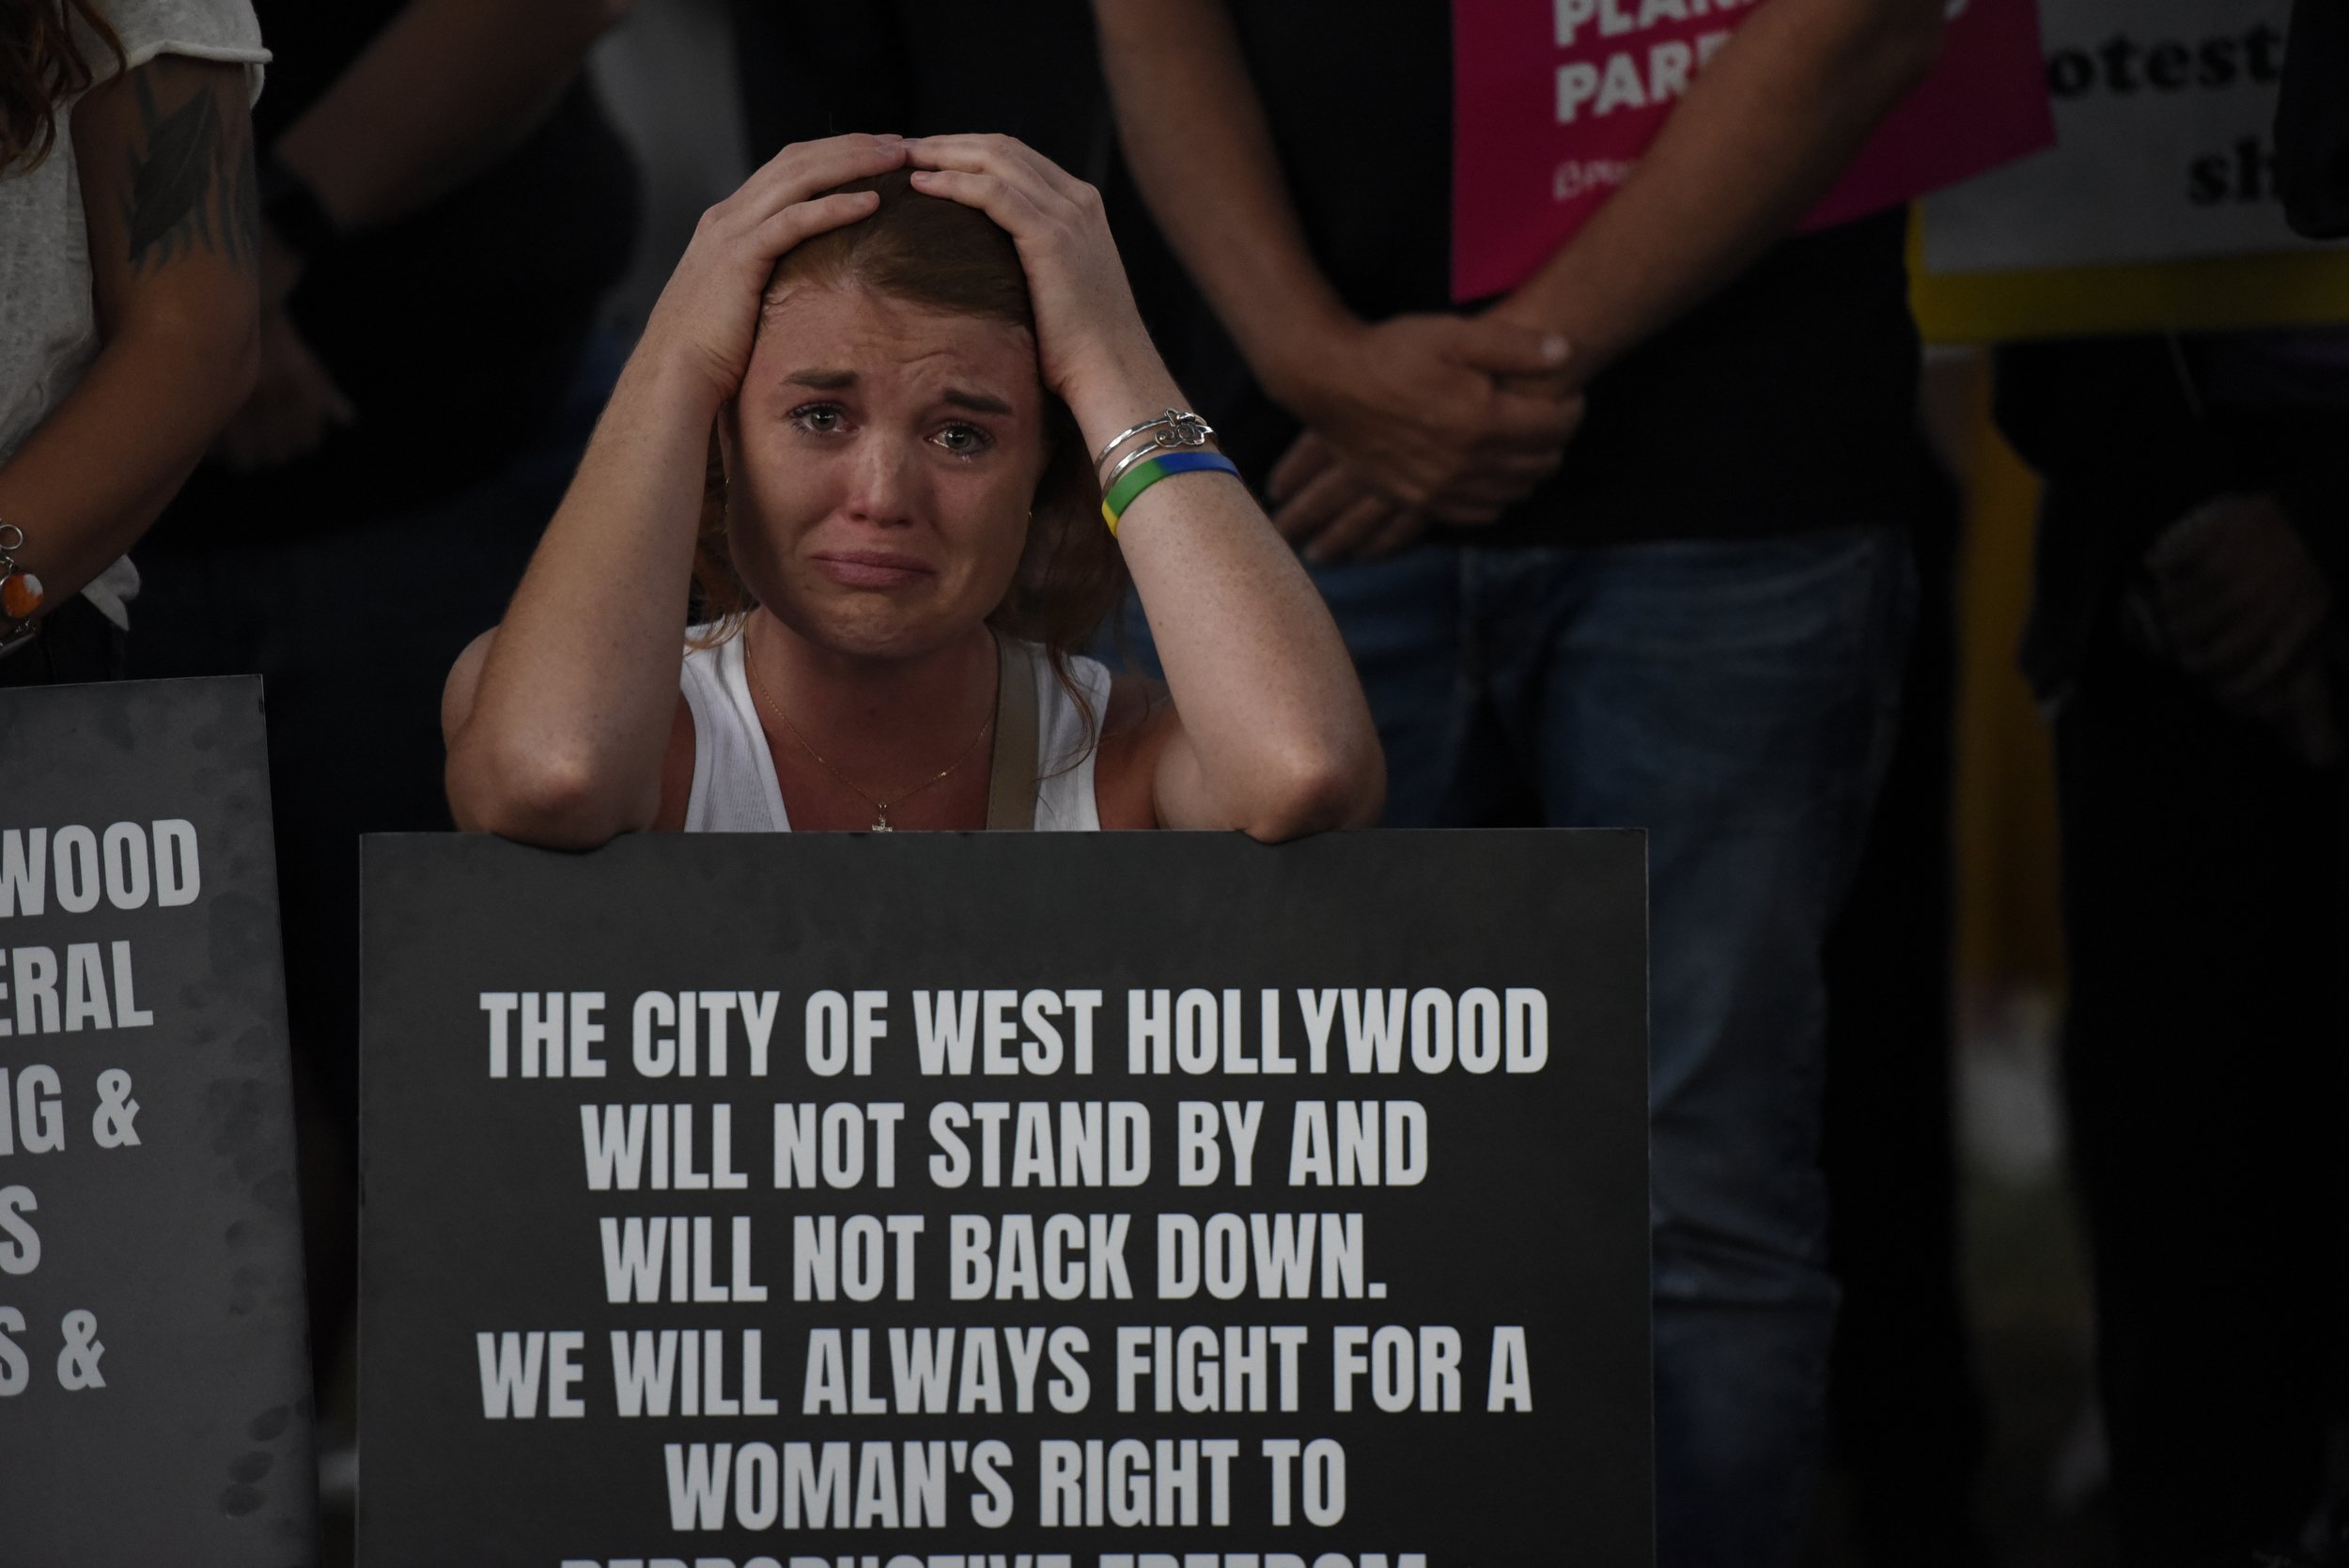  A woman mourns the decision during the protest in West Hollywood on Friday, June, 24, 2022. 